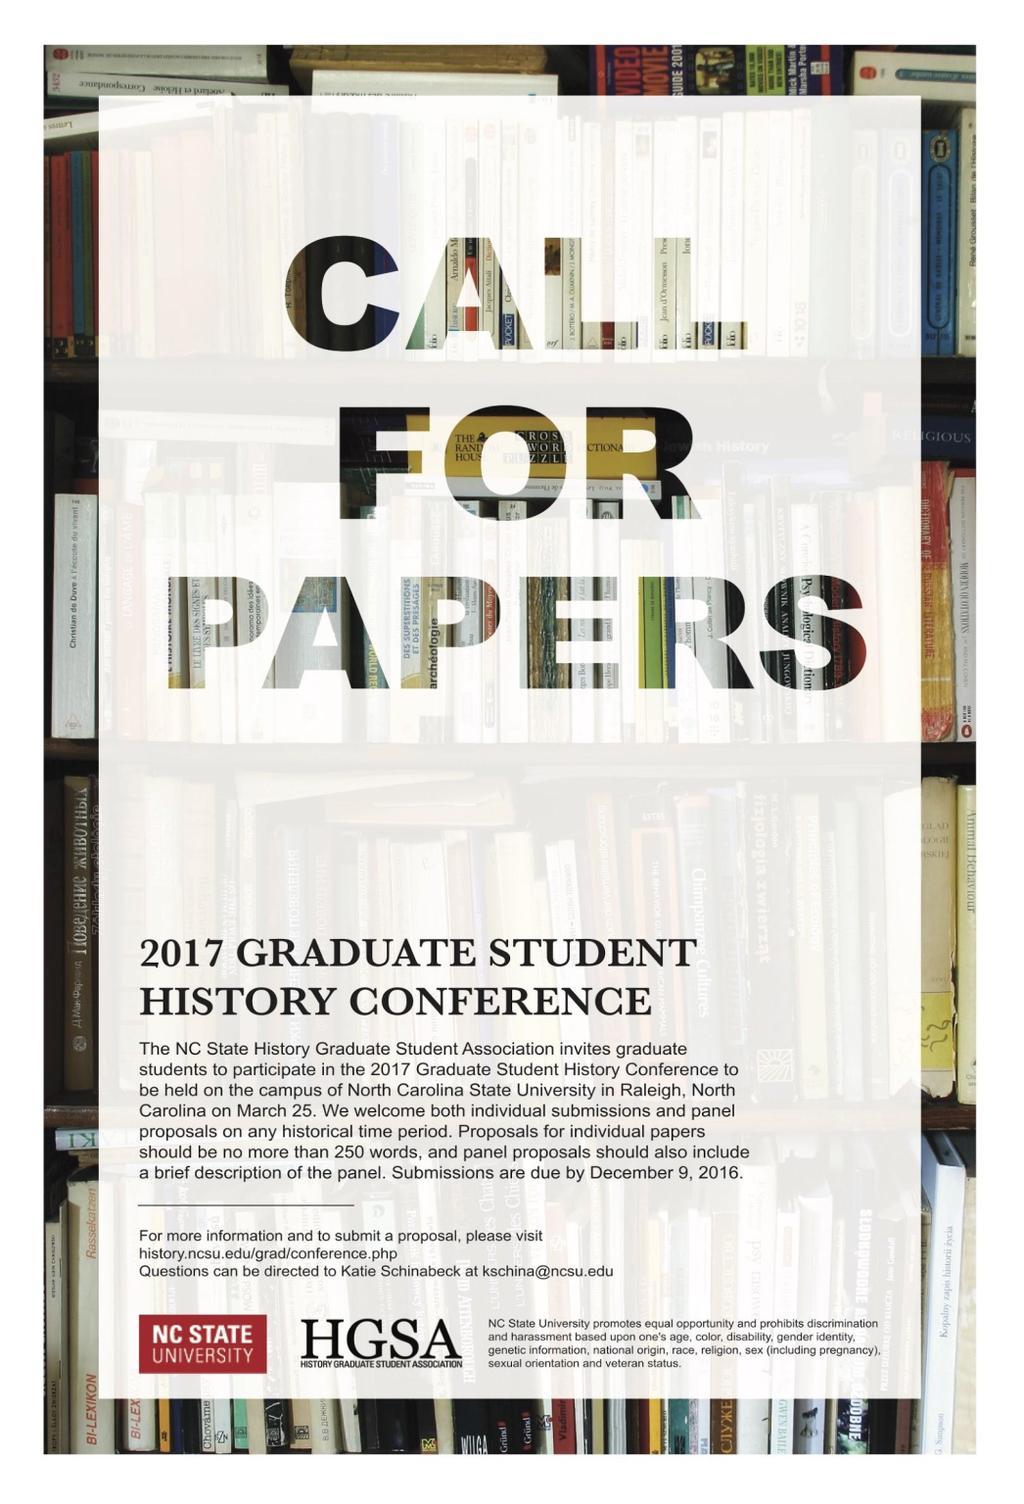 NC State s History Graduate Student Association presents the 2017 GRADUATE STUDENT HISTORY CONFERENCE Keynote Address: Memoirs, Authors, and History-Writing: Why Oral History is Good to Think With by